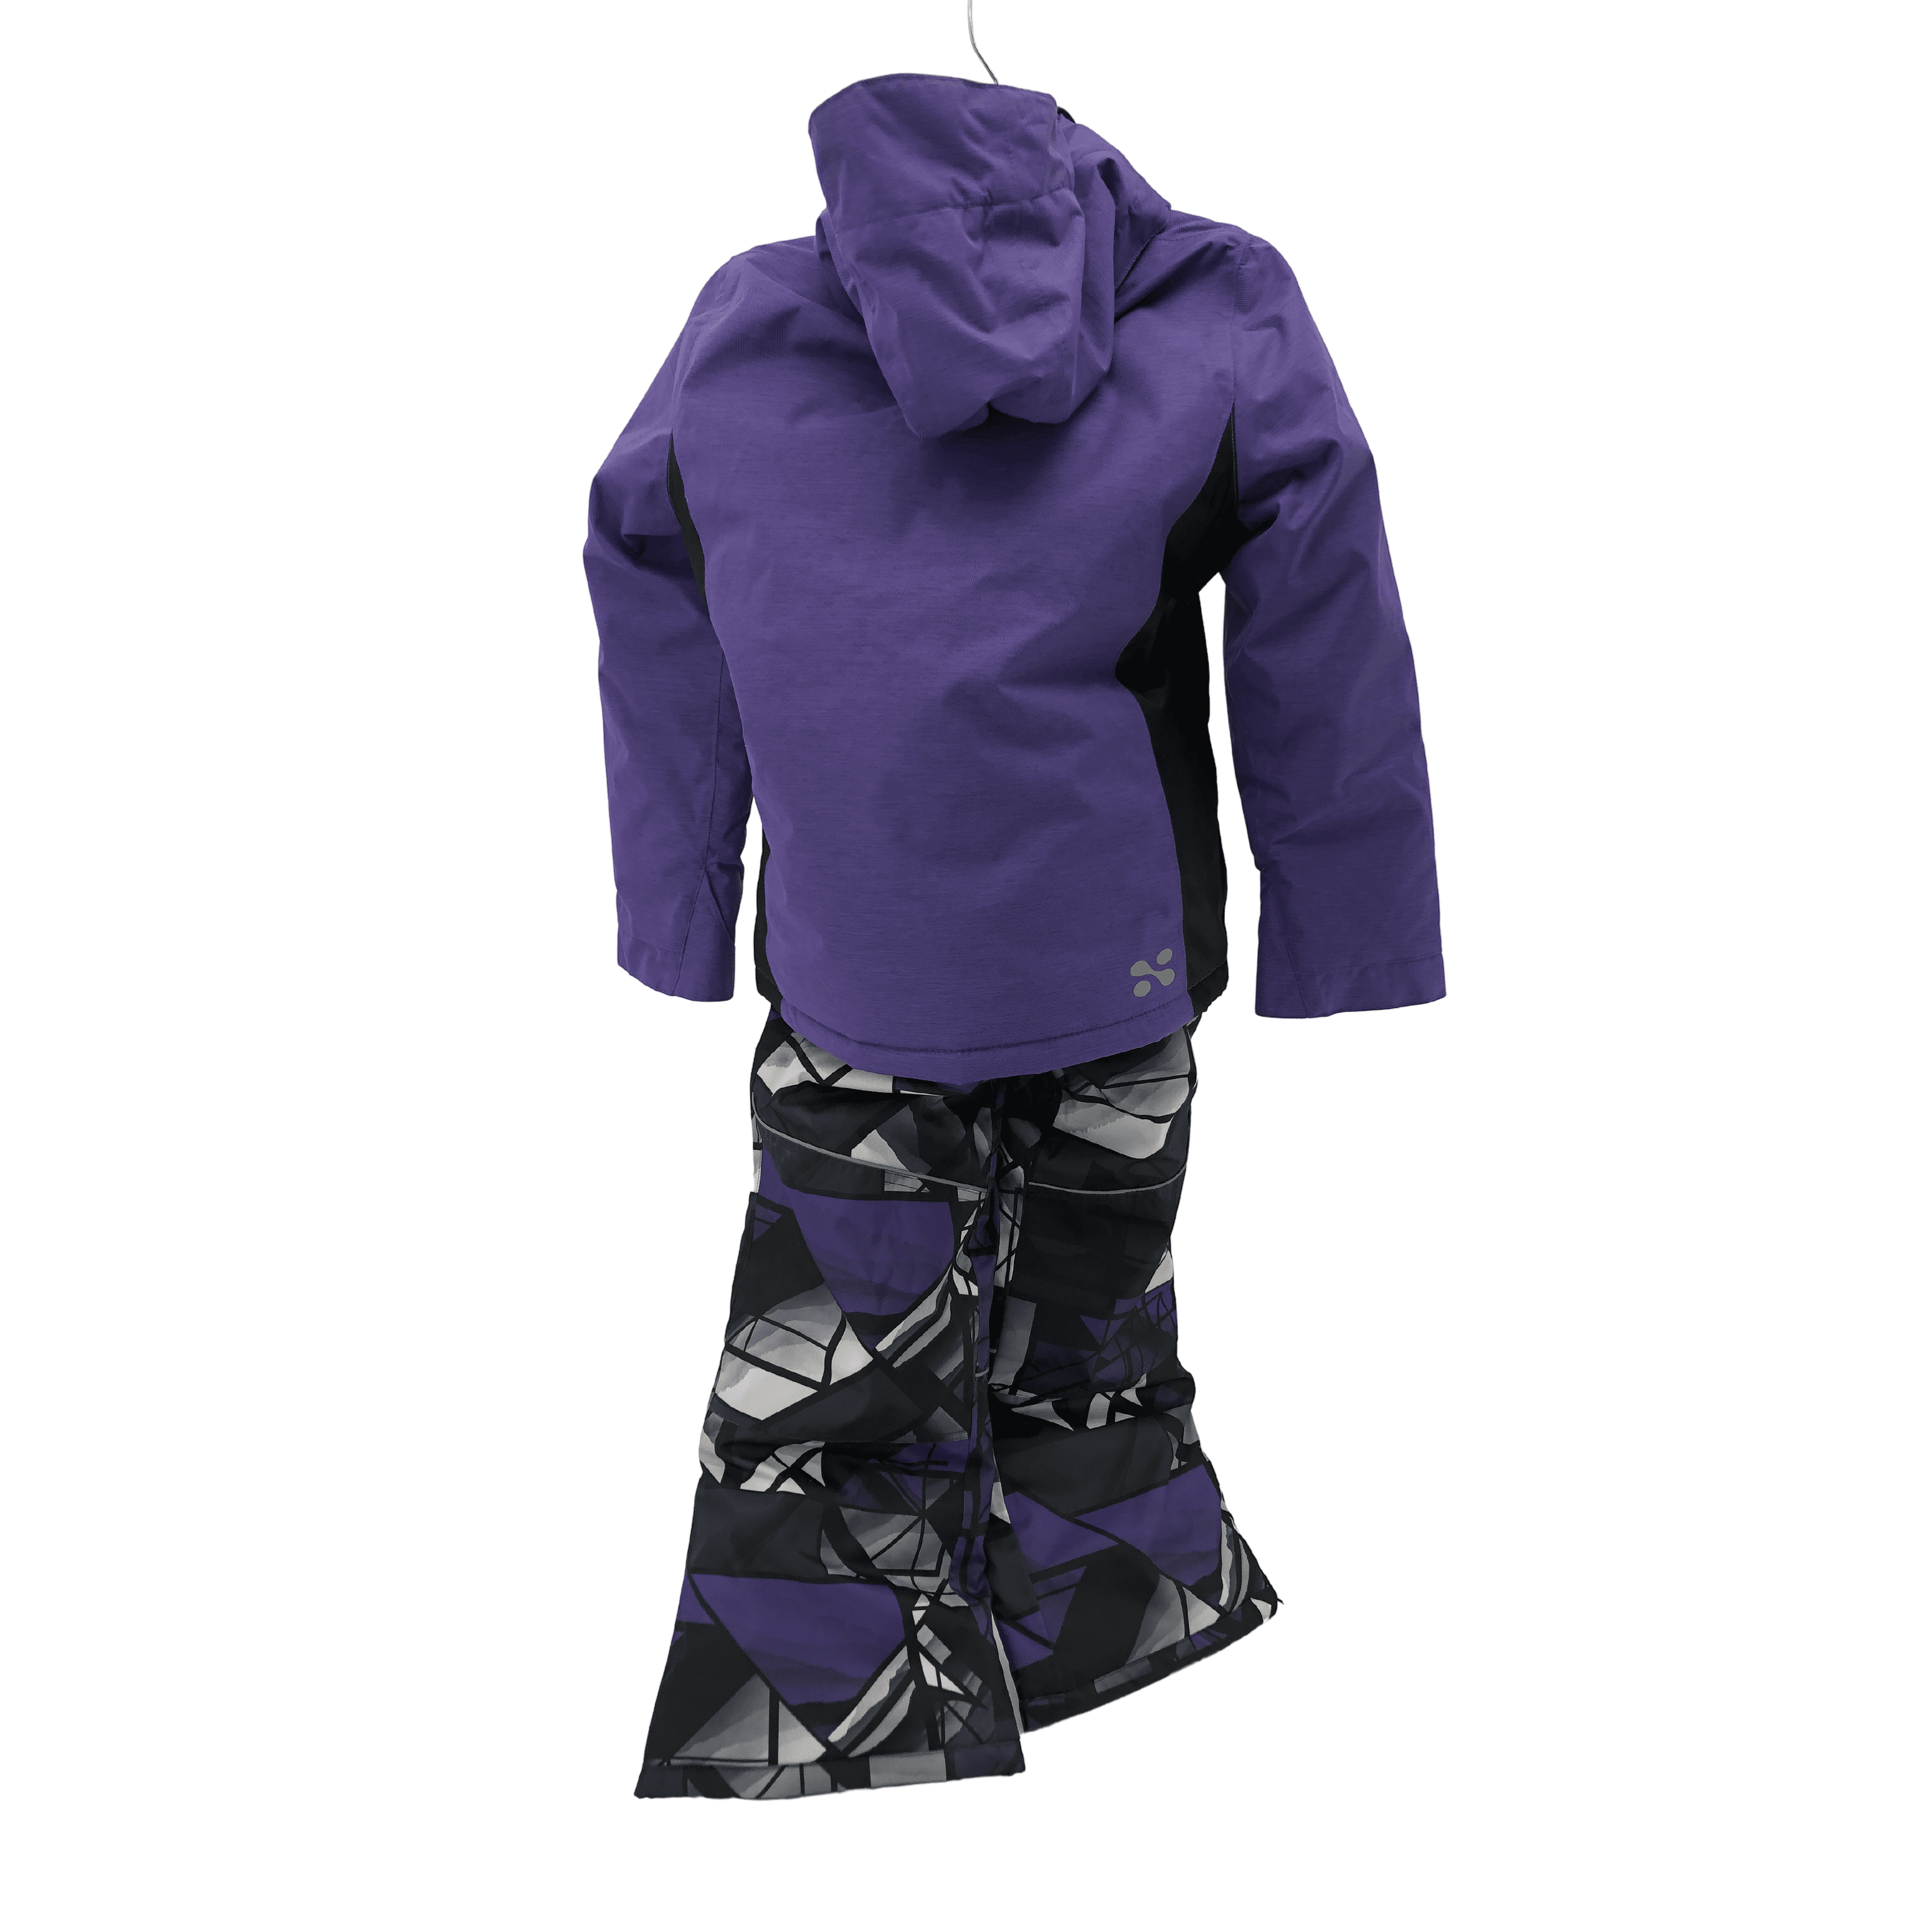 Cross Mountain Boys 2 Piece snowsuit in size 8 and in Purple and Black